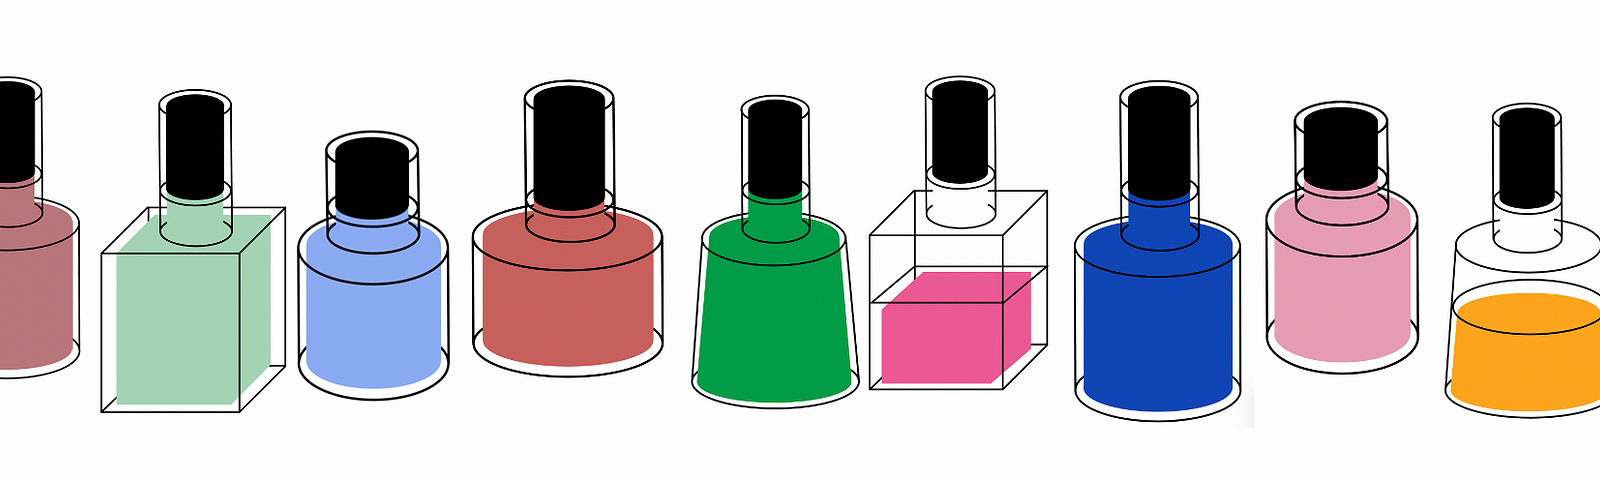 Image shows an illustration of a variety of nail polish bottles in many shapes and colors.